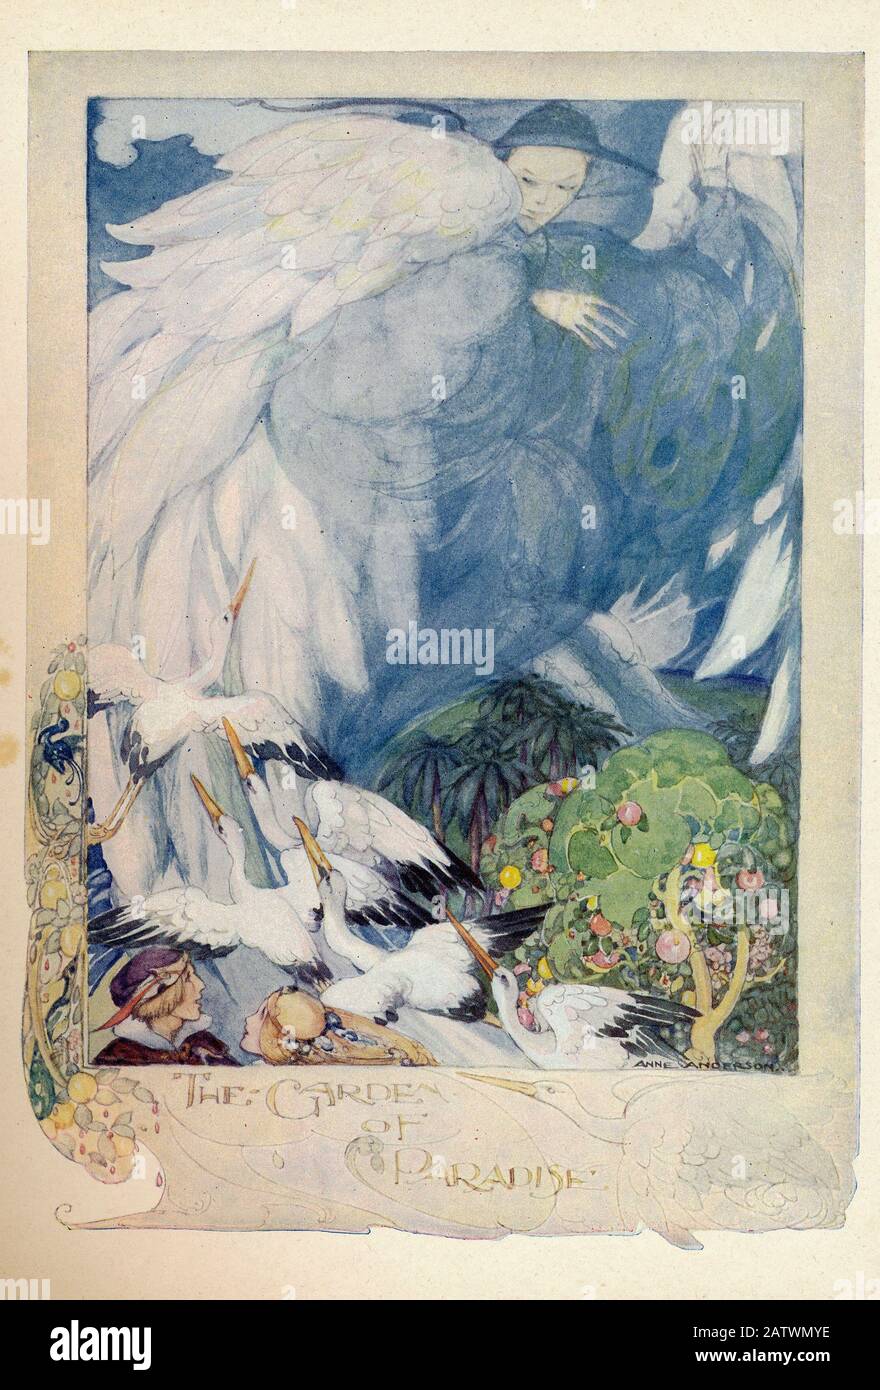 Andersen s fairy stories - page 32a  - 1924 - Illustration by Anne Anderson (1874 - 1930) Stock Photo